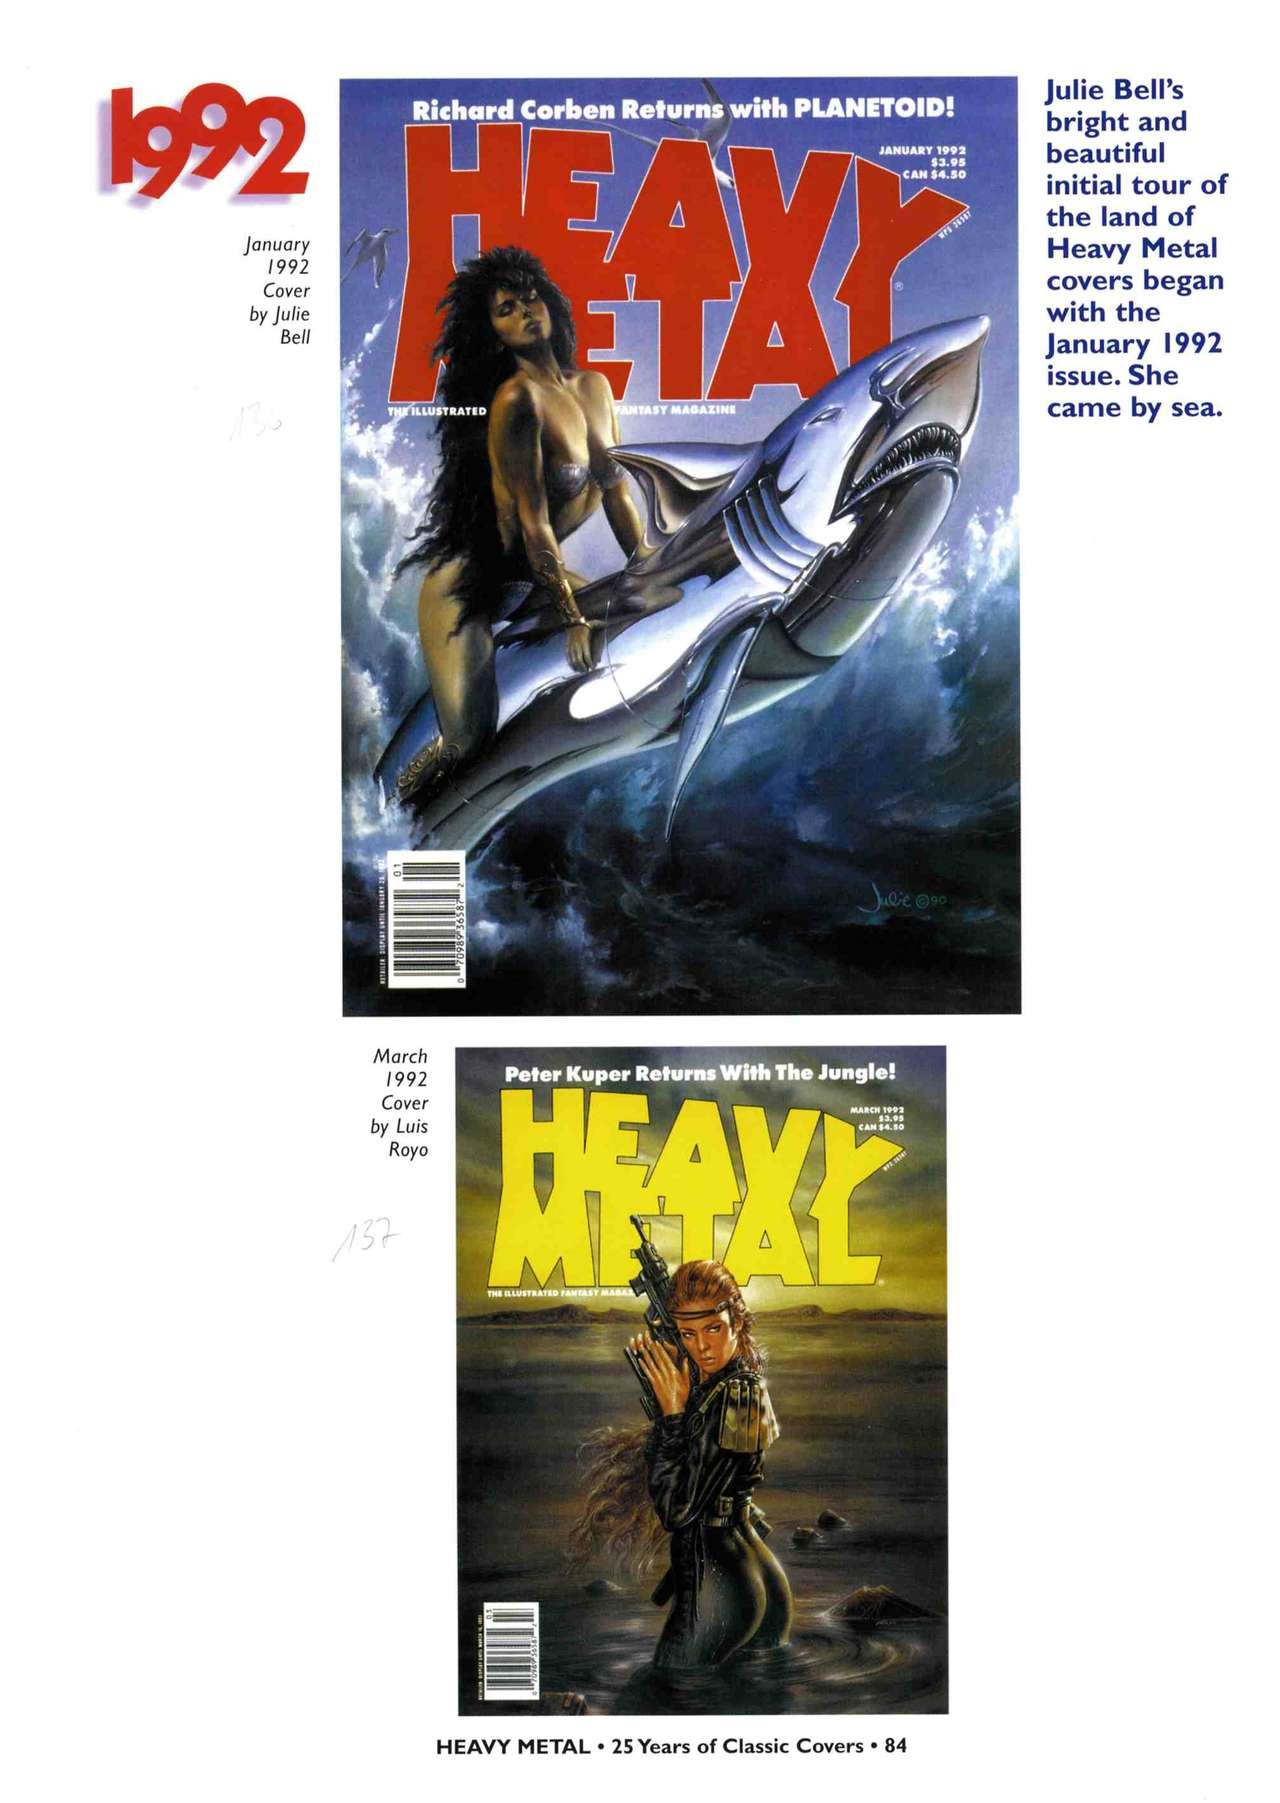 HEAVY METAL 25 Years of Classic Covers 89